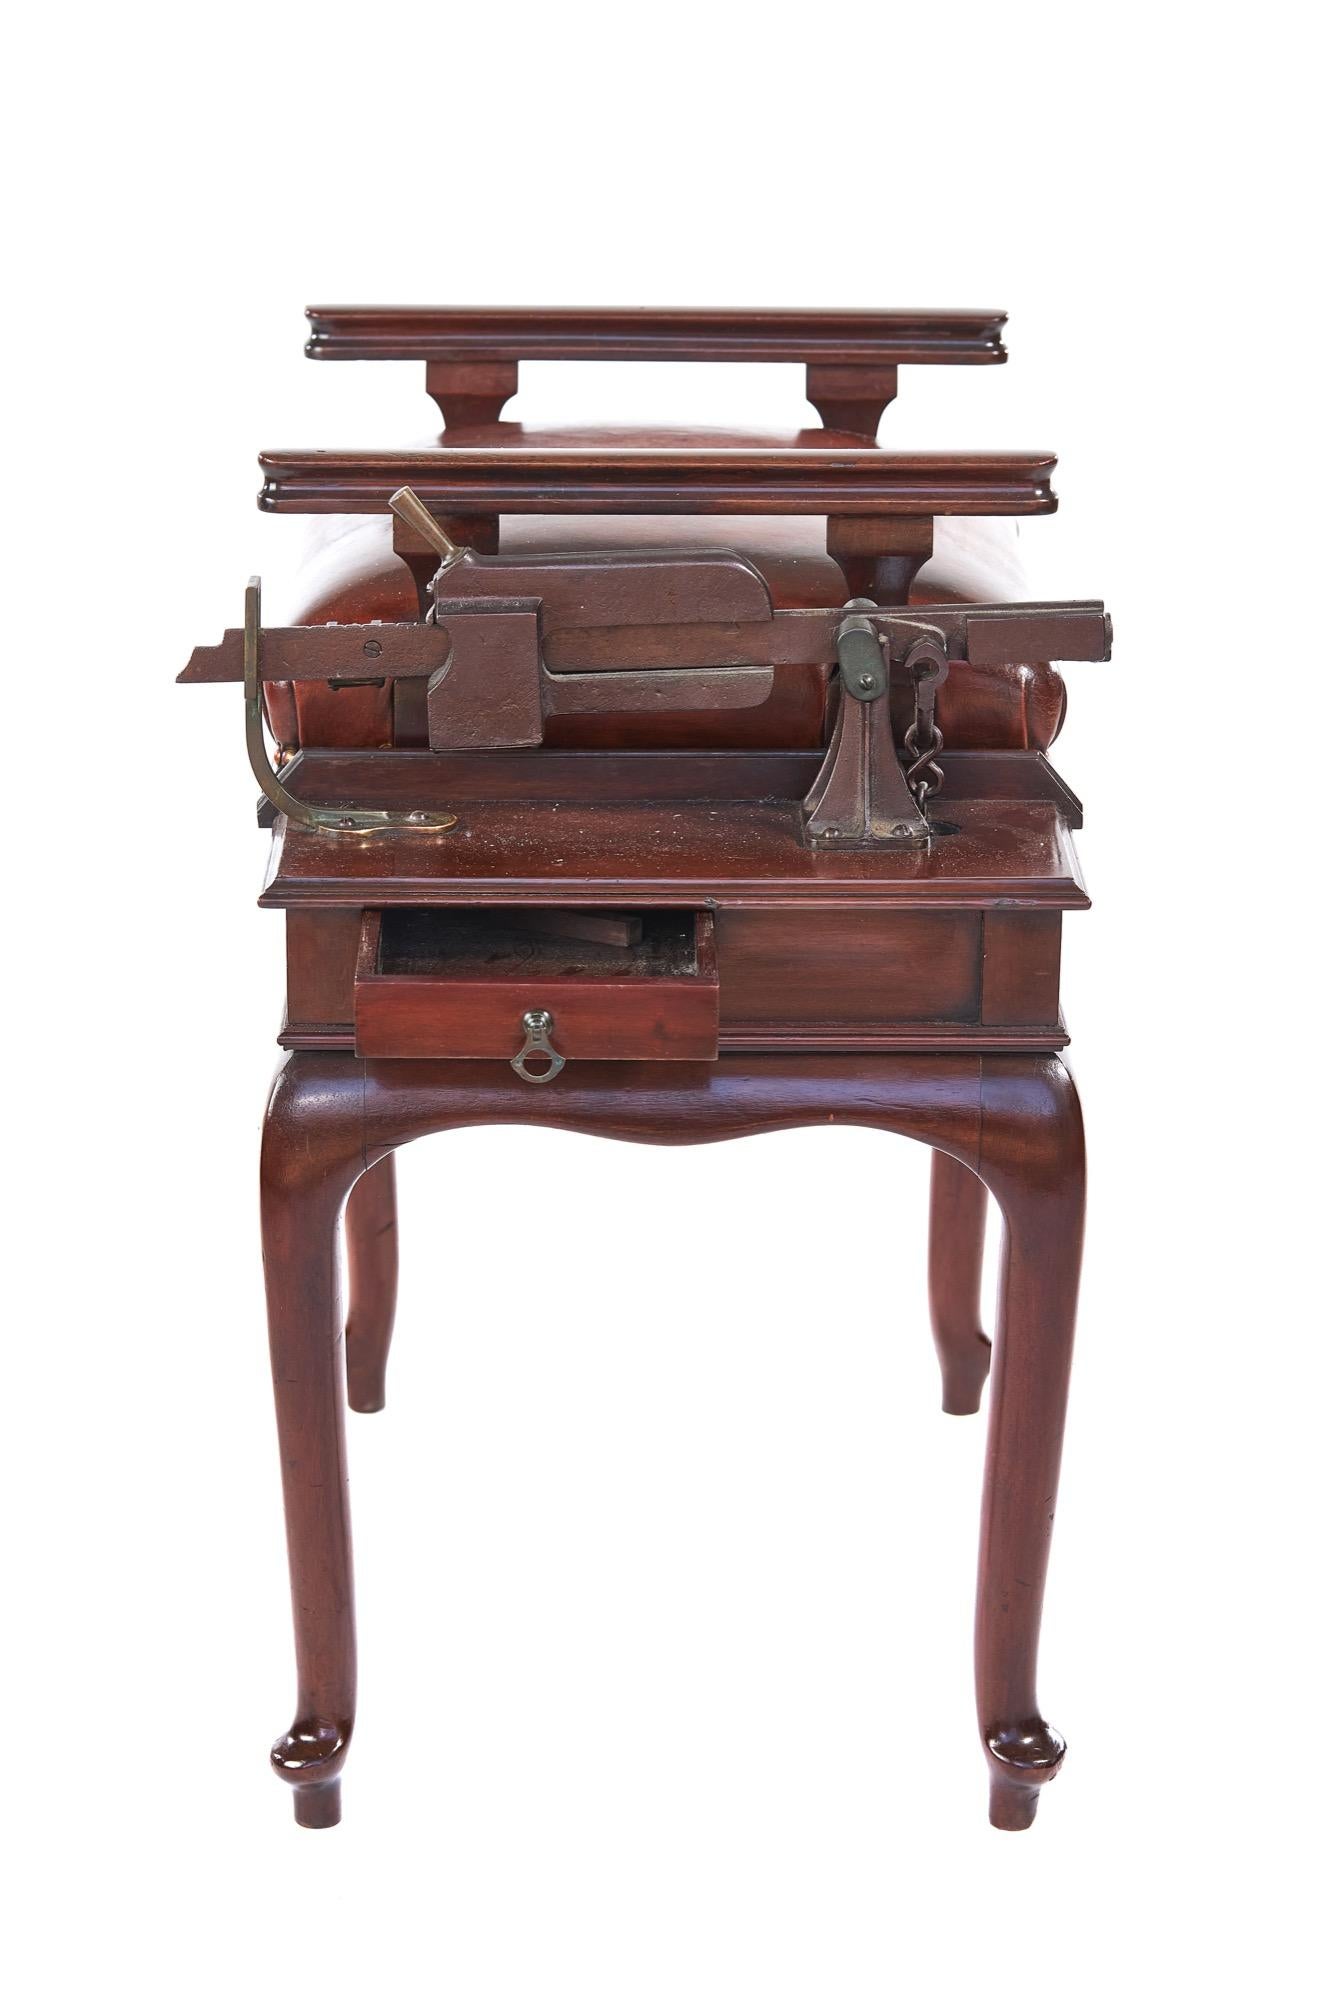 Other Antique Edwardian Mahogany and Leather Seat Jockey Scales